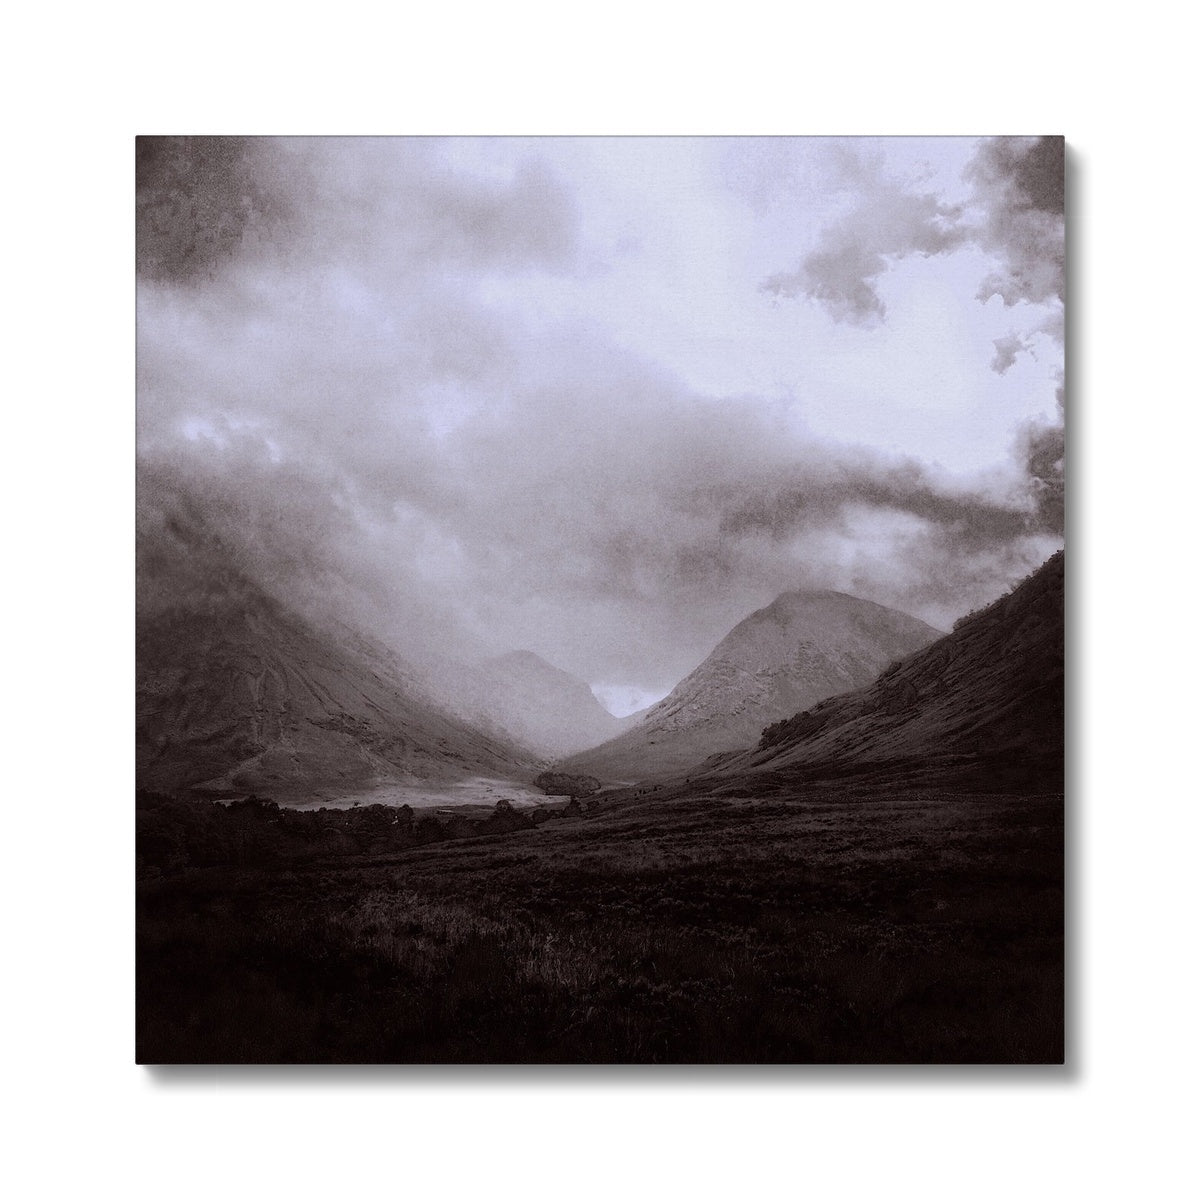 Glencoe Mist Painting | Canvas From Scotland-Contemporary Stretched Canvas Prints-Glencoe Art Gallery-24"x24"-Paintings, Prints, Homeware, Art Gifts From Scotland By Scottish Artist Kevin Hunter